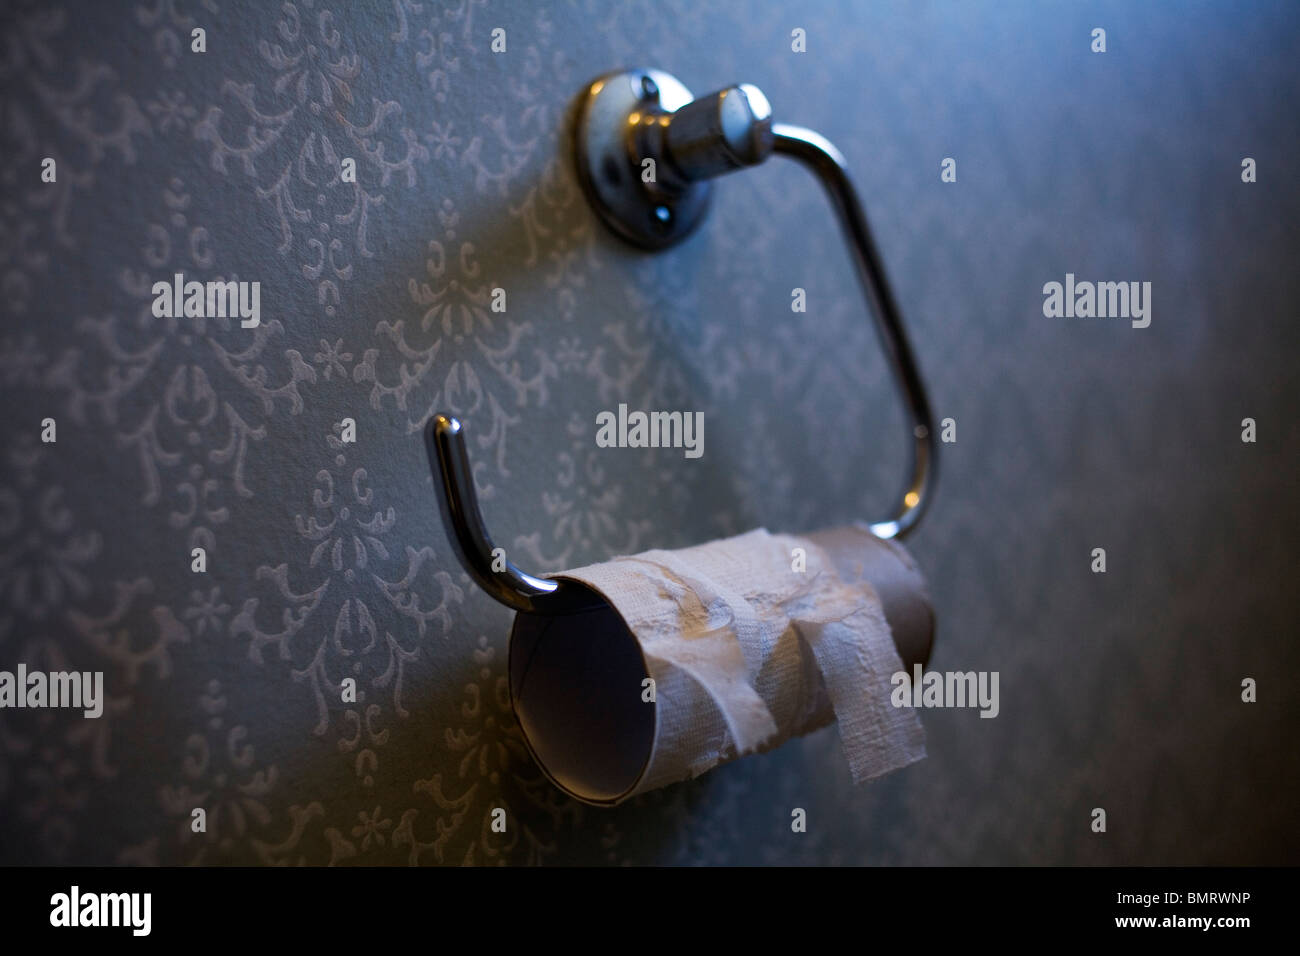 Used toilet roll. Stock Photo